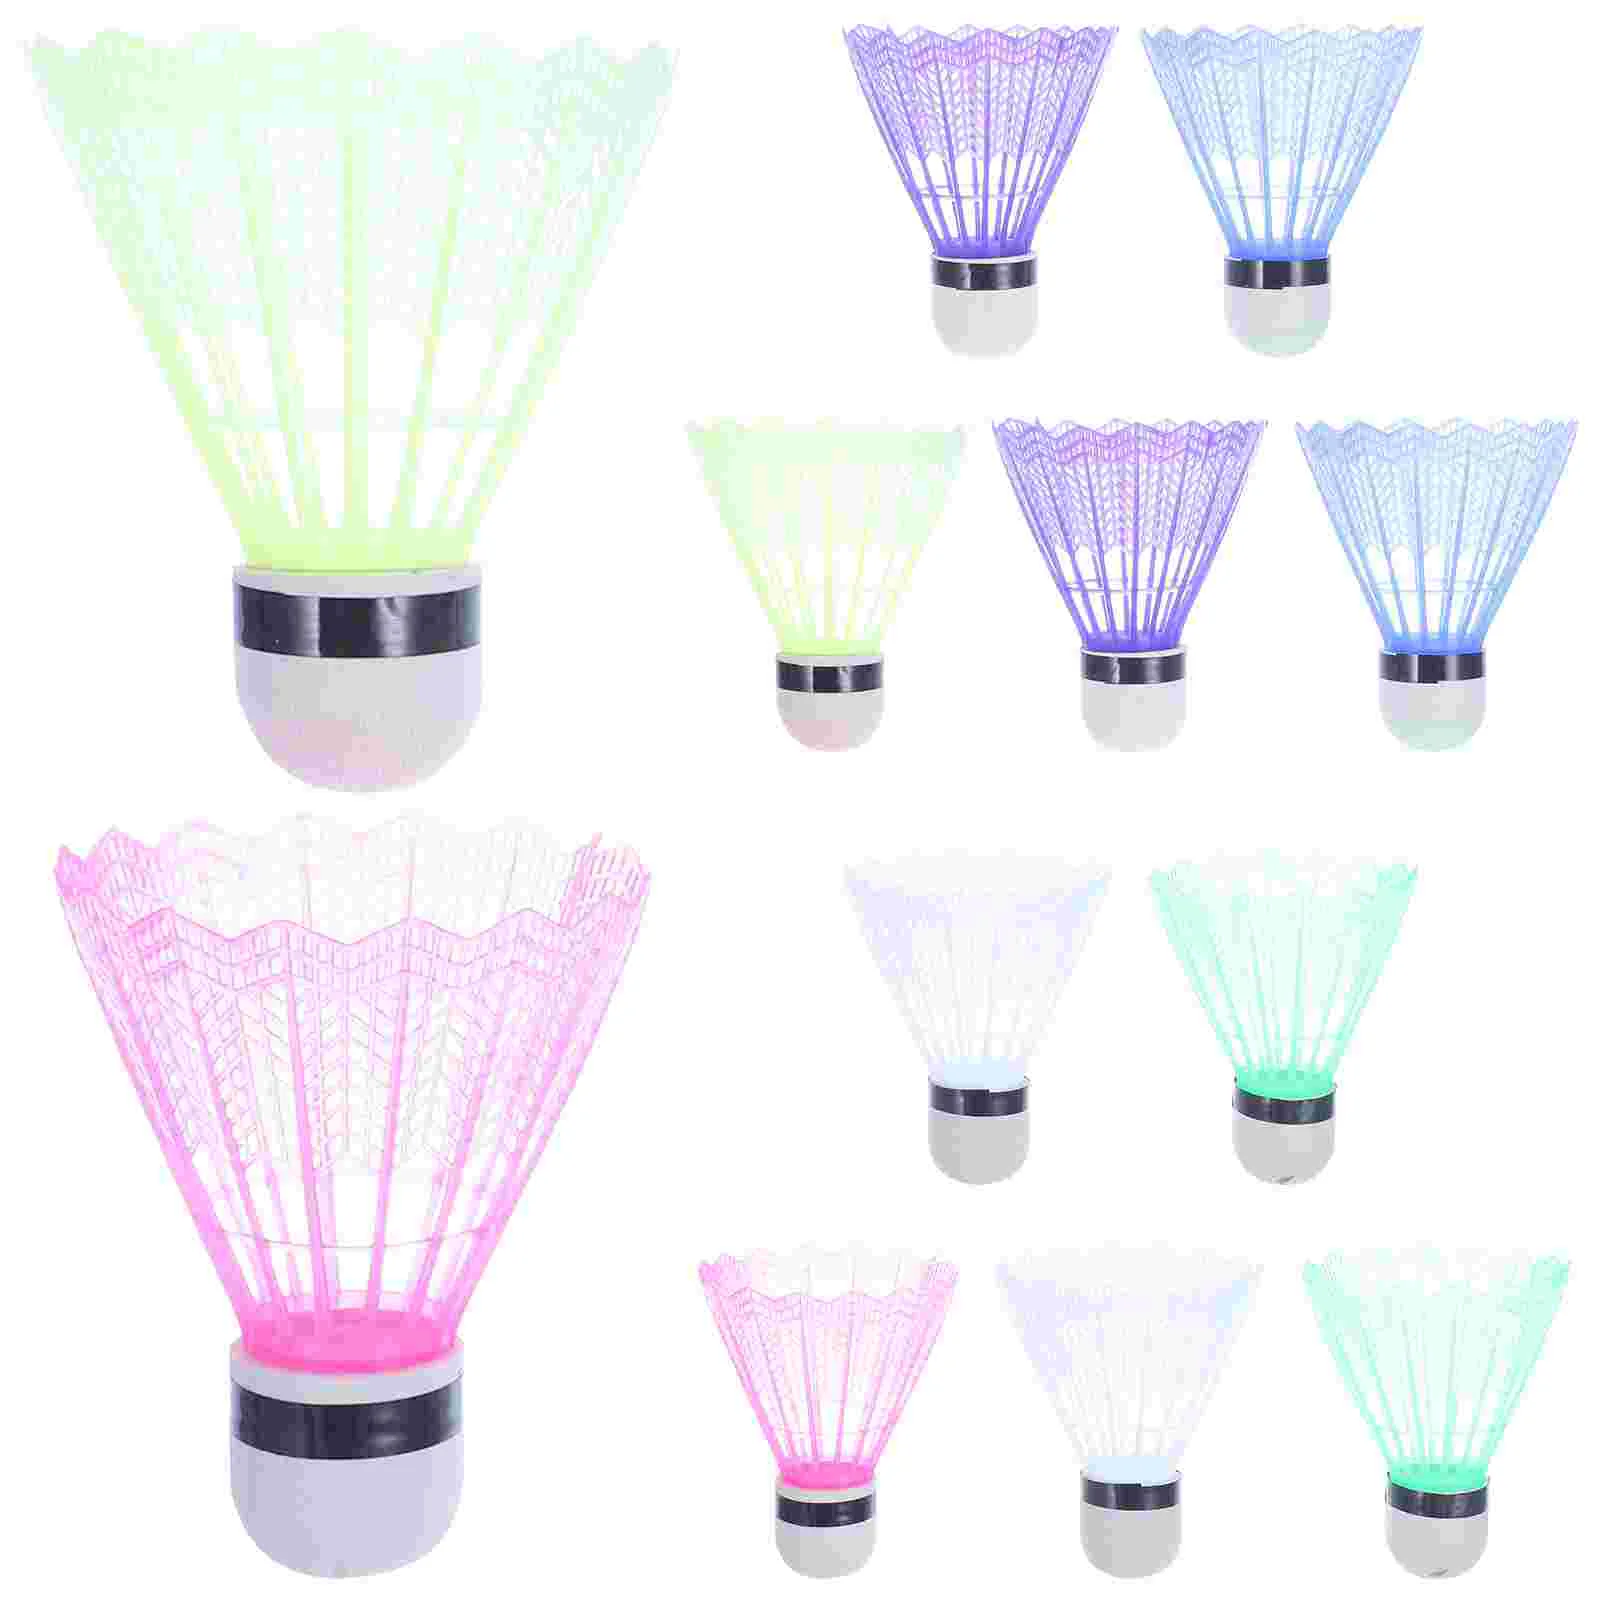 

WINOMO 12Pcs Nylon Shuttlecocks Training Plastic Badminton with Great Stability and Durability for Indoor Outdoor Sports